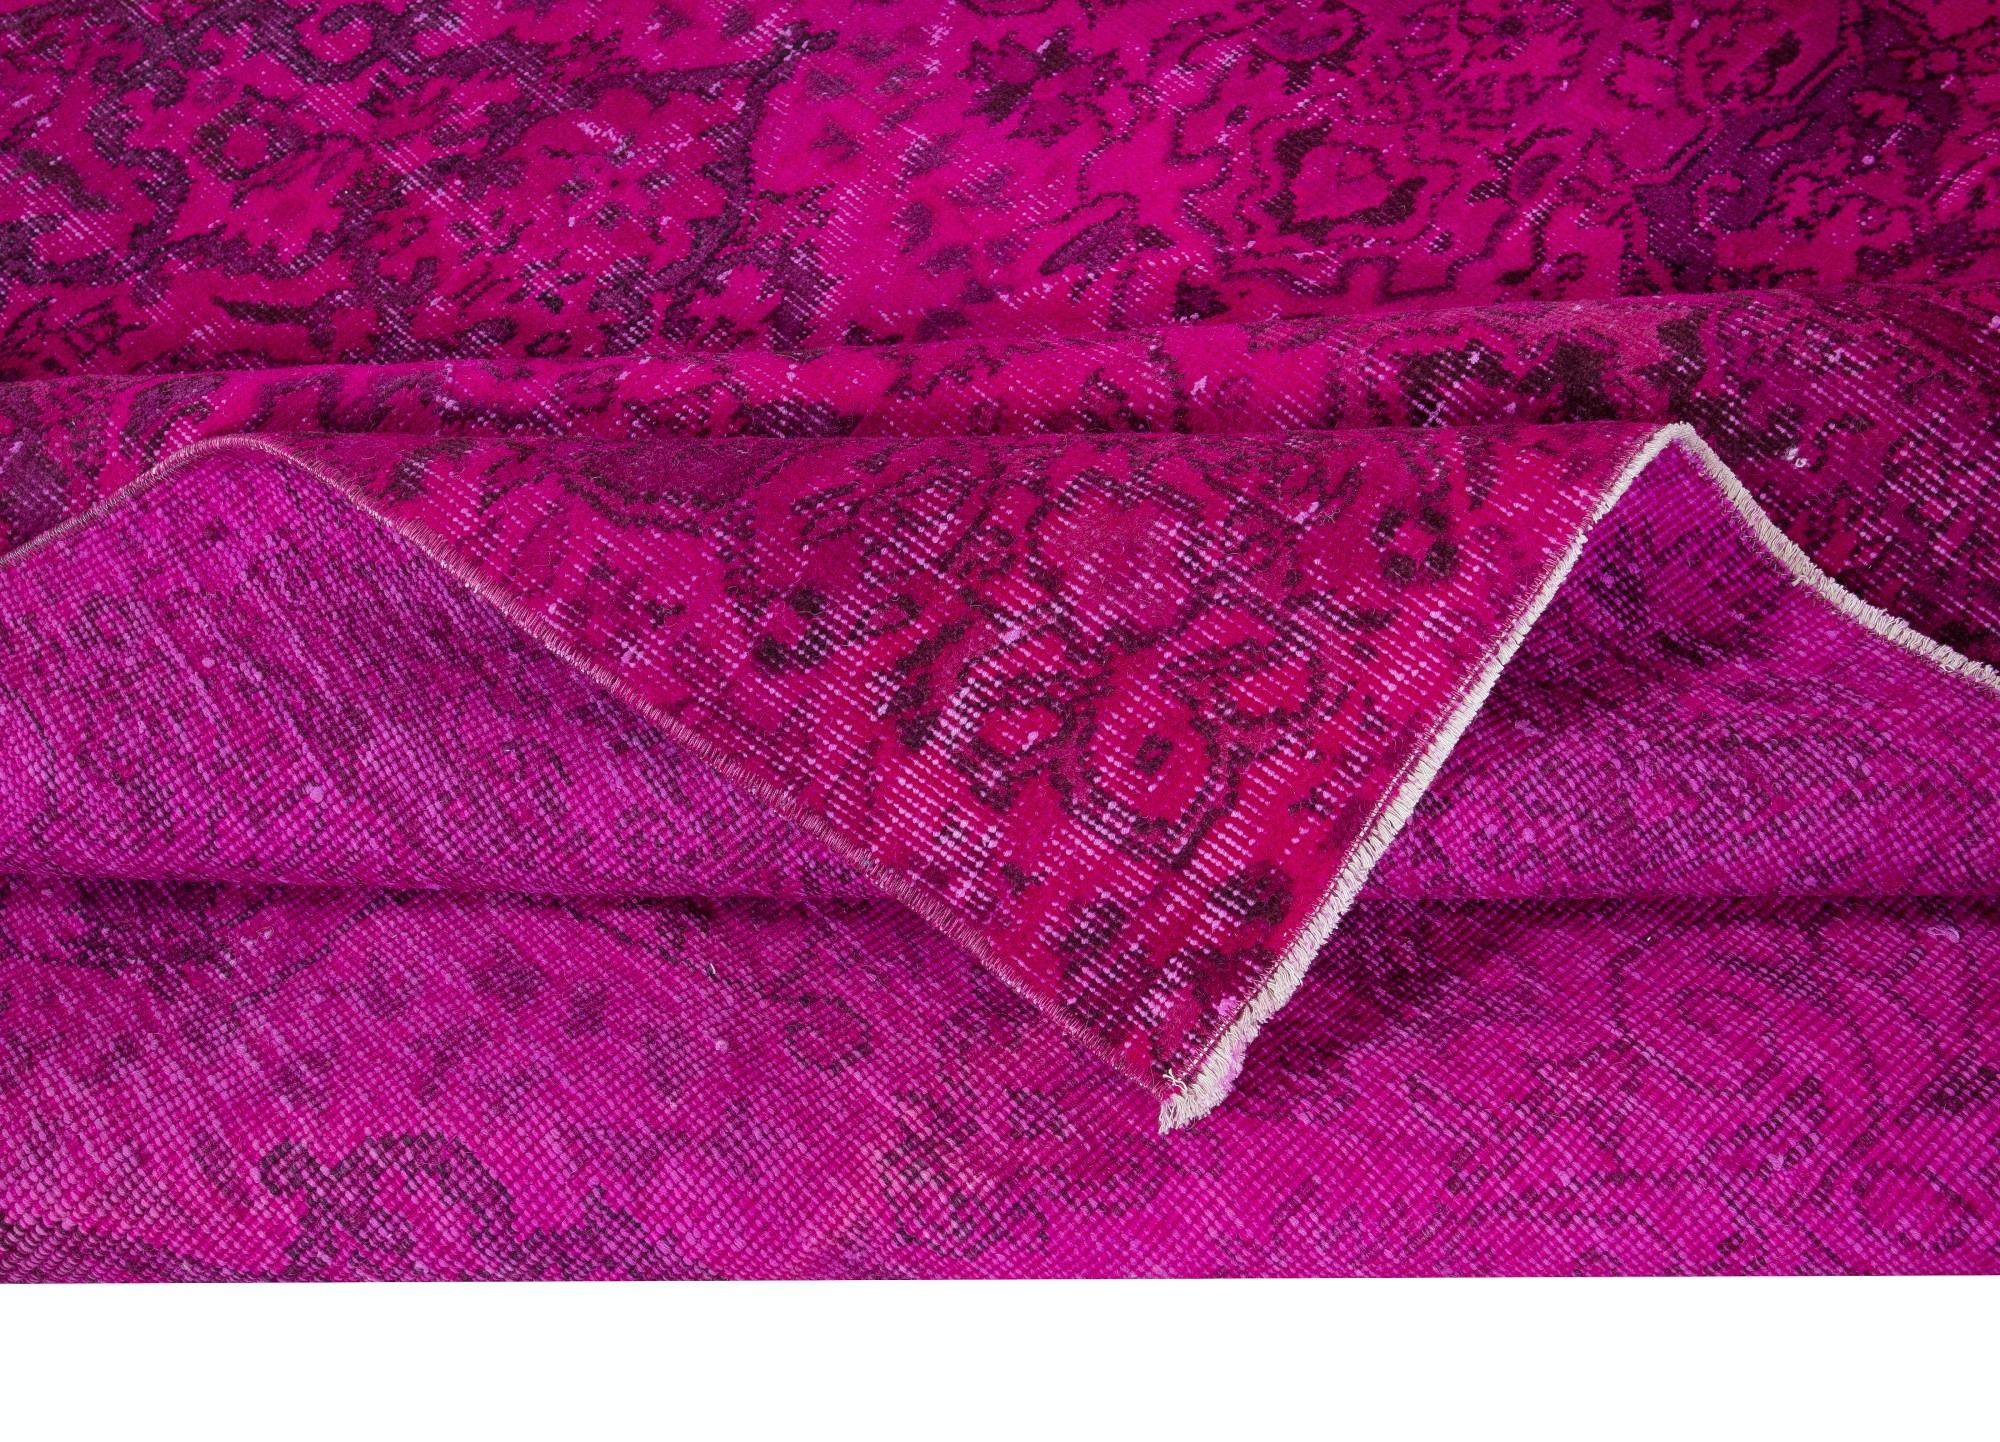 5.6x8.7 Ft Handmade Turkish Wool Area Rug in Hot Pink, Great for Modern Interior In Good Condition For Sale In Philadelphia, PA